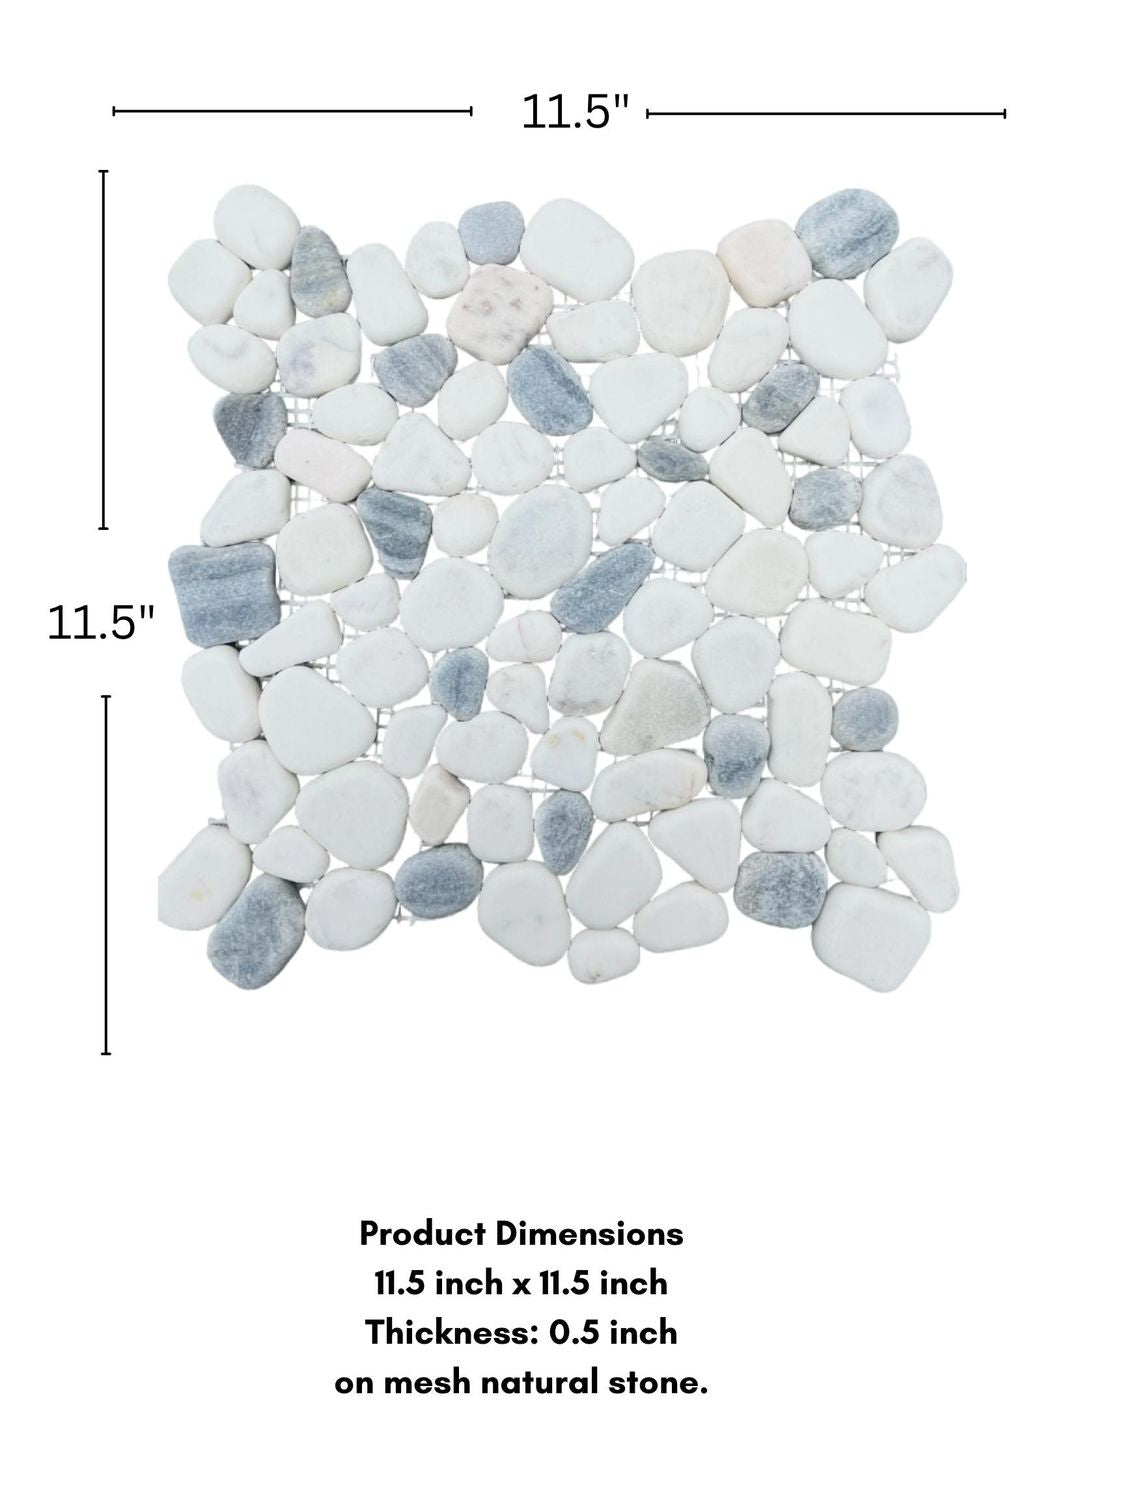 MS International White Polished Pebbles 12 in. x 12 in. Marble Floor & Wall Tile - Box of 5 sqf